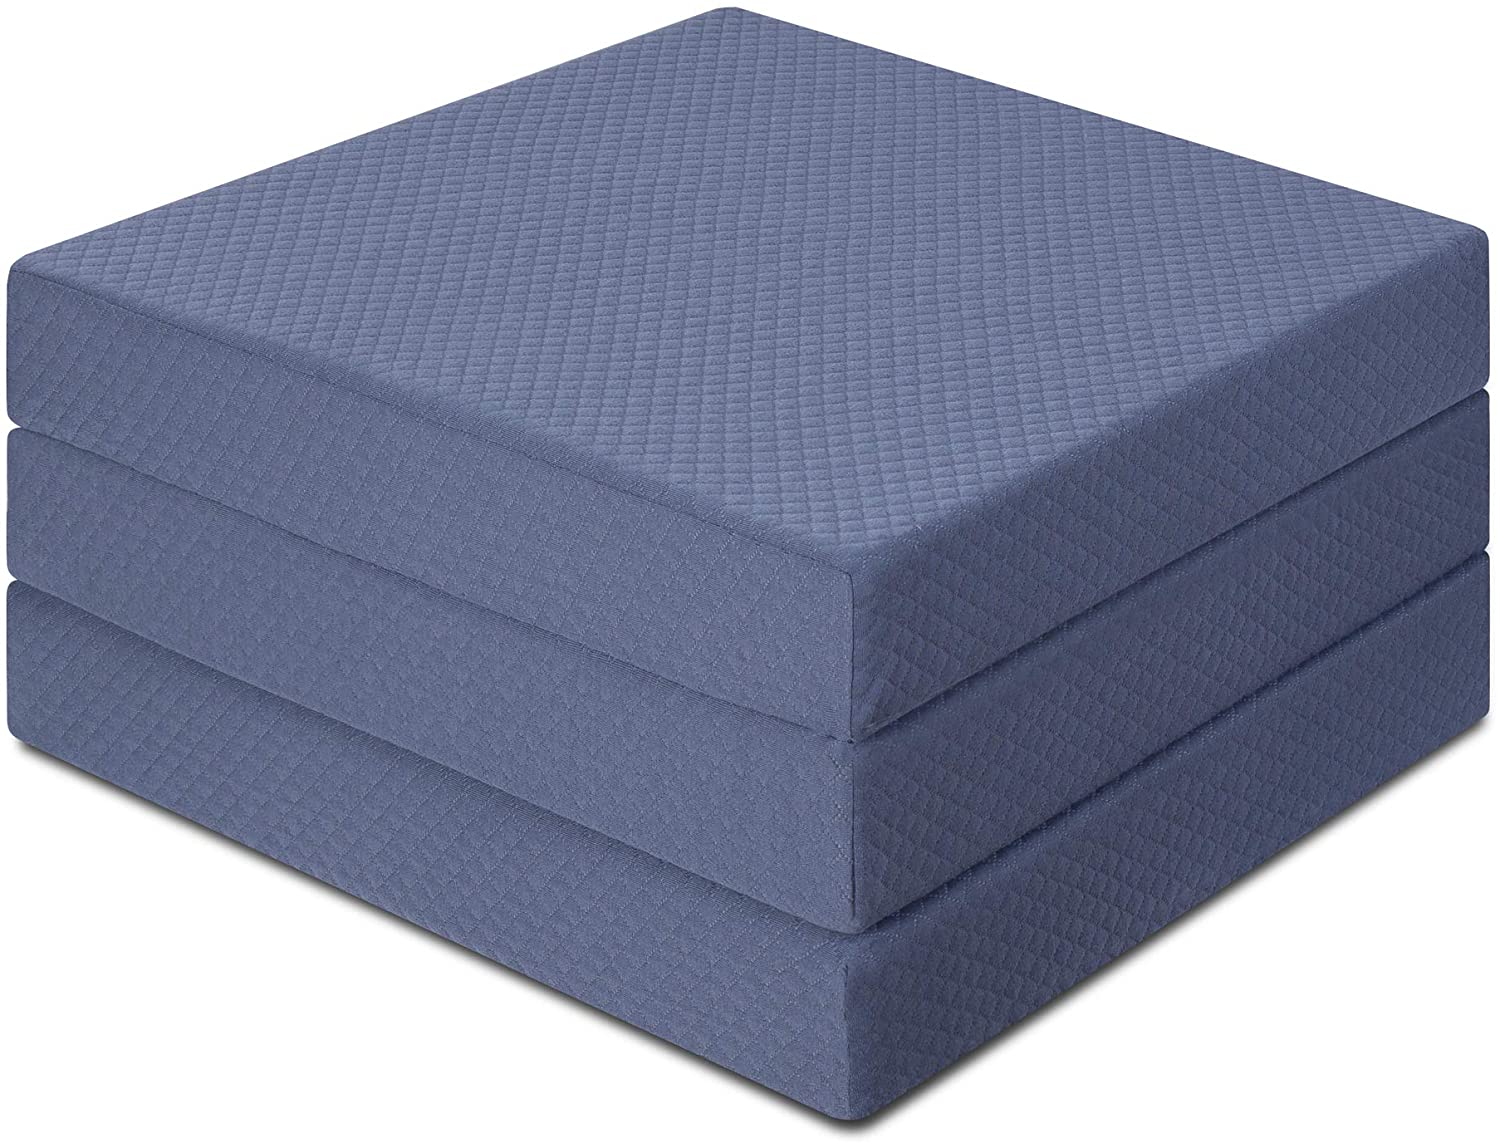 You Can Thank Us Later- 3 Reasons Thinking About Tri Fold Mattress